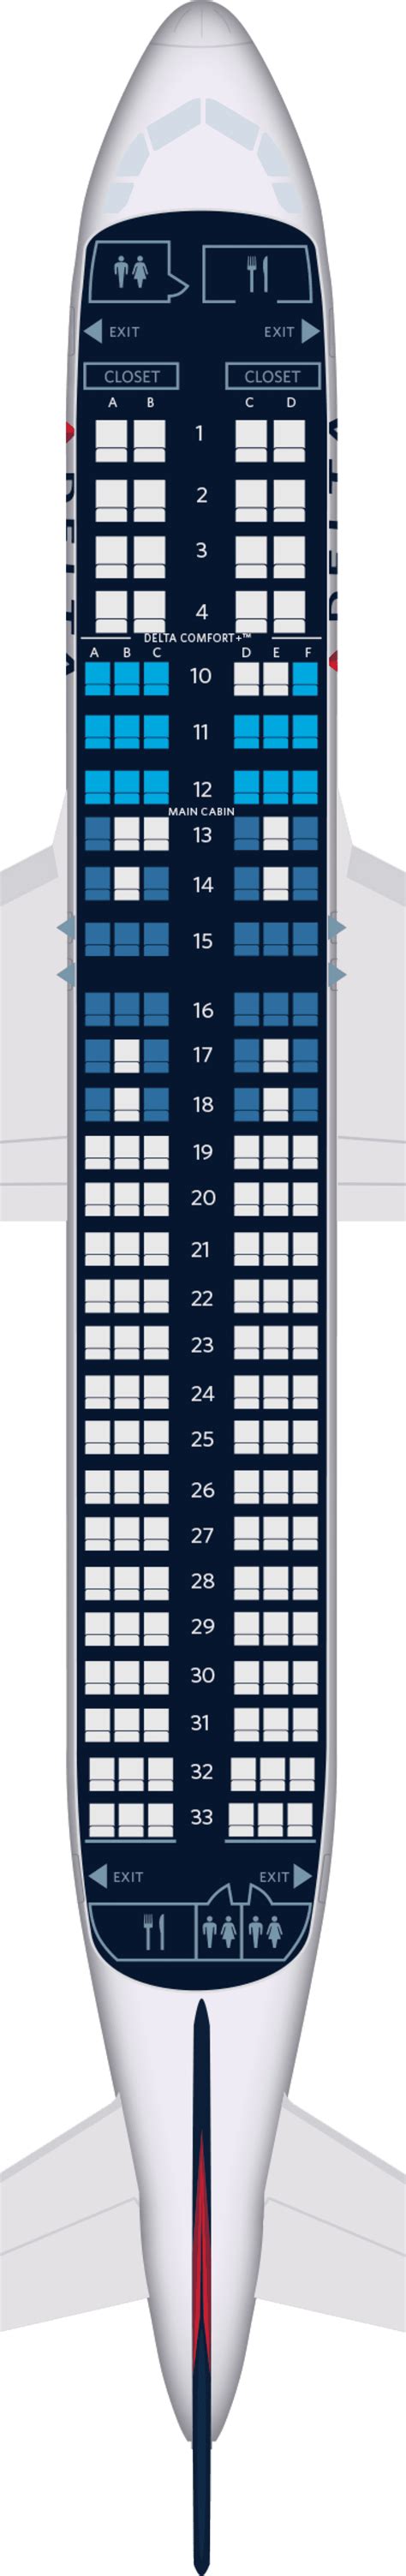 Delta Airbus A320neo Seat Map Image To U